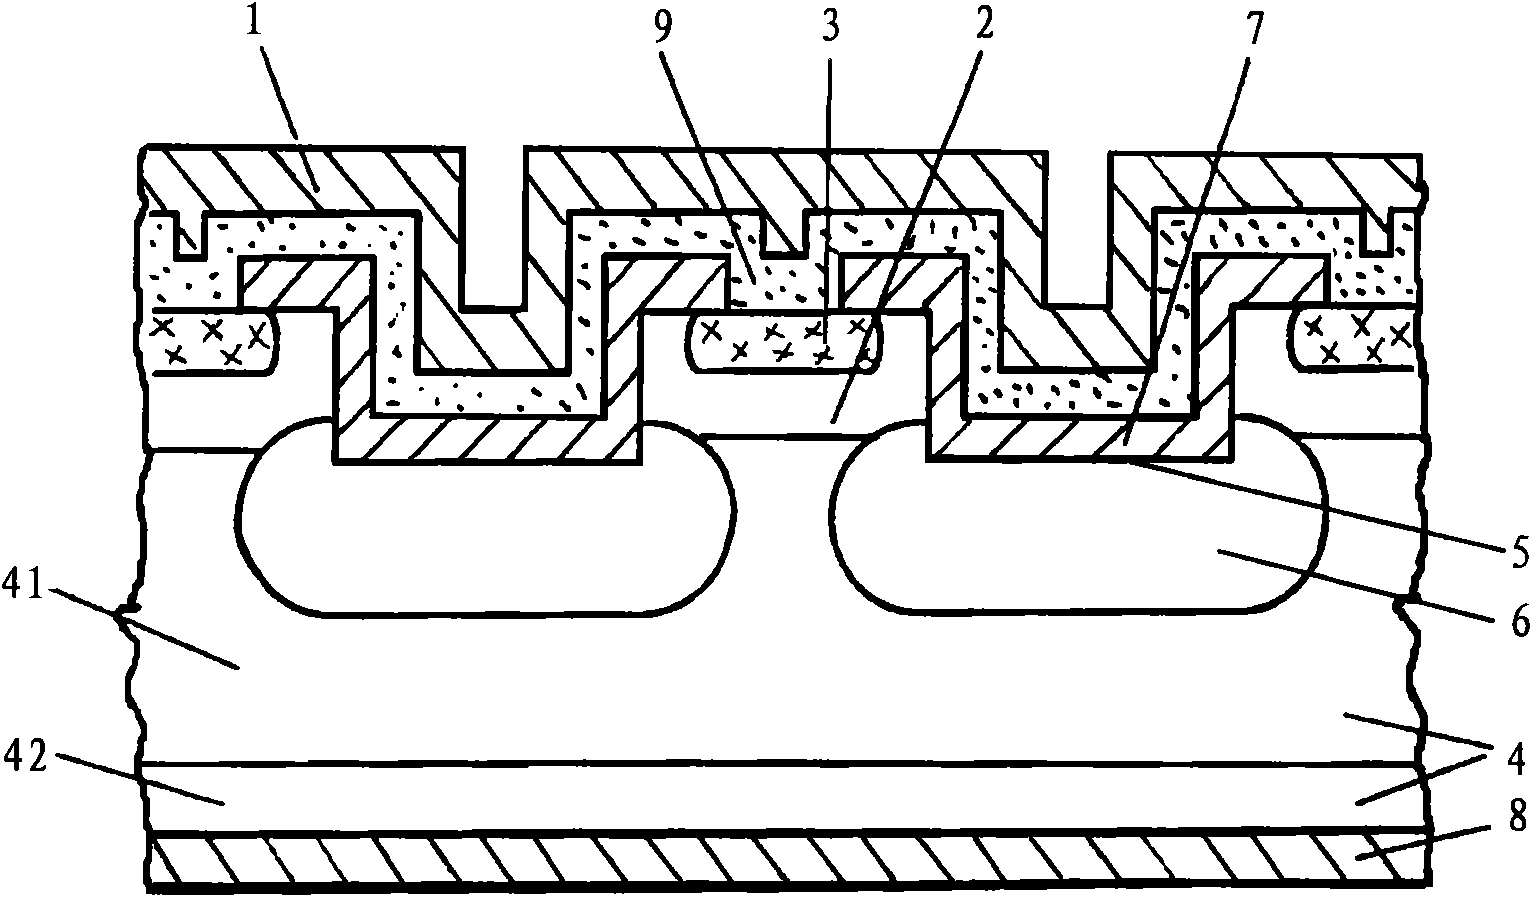 Gate associated transistor with grooved gate polysilicon structure